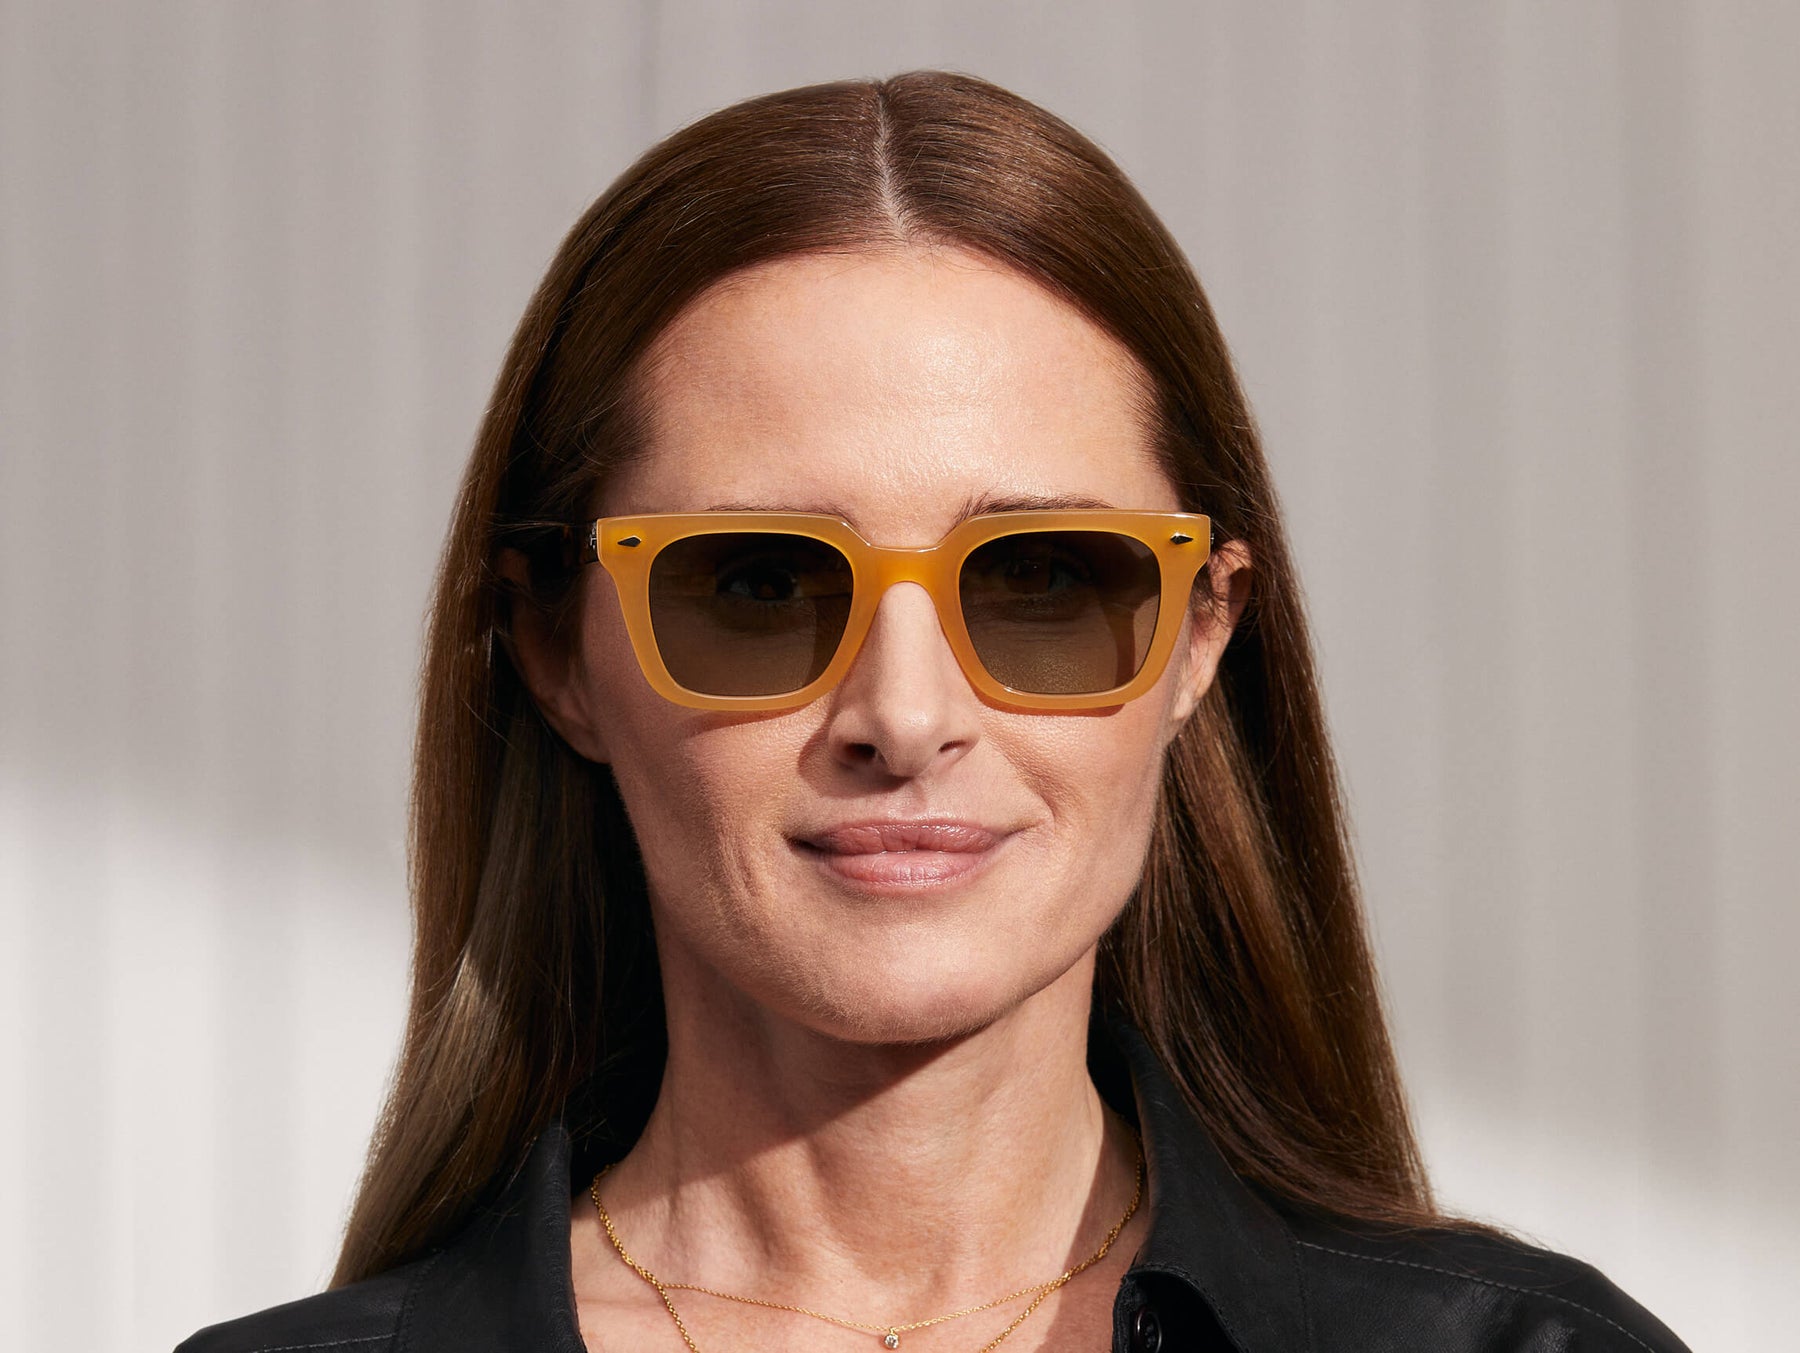 Model is wearing The GROBER SUN in Honey/Tortoise in size 48 with Forest Wood Tinted Lenses